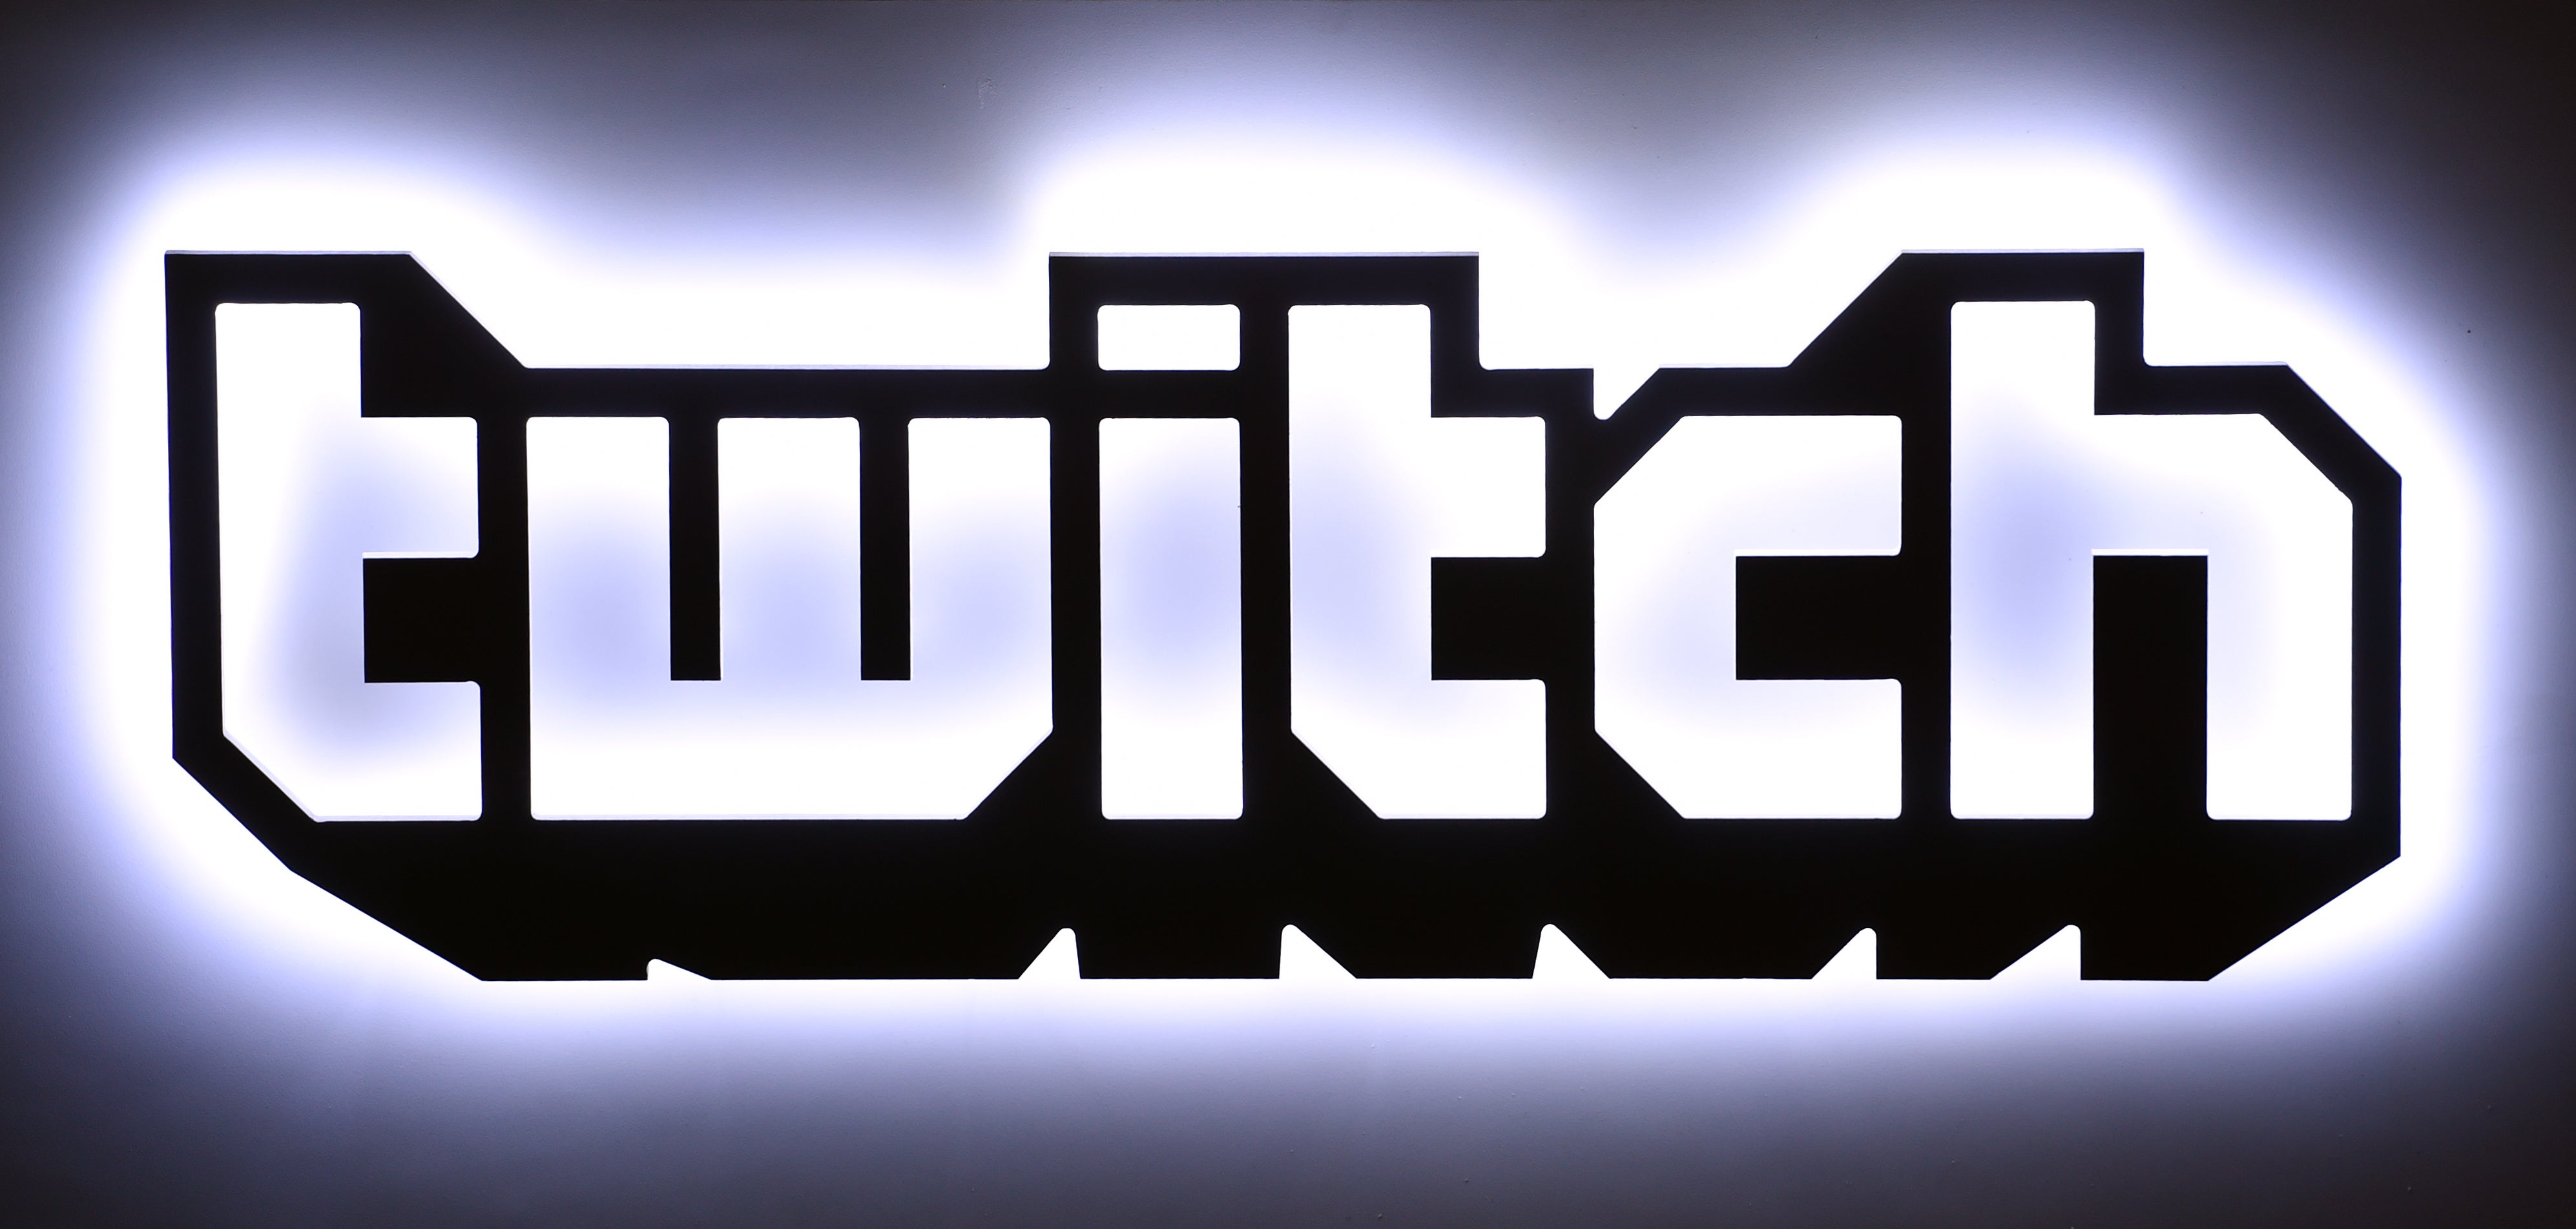 Streamer breaks Twitch record with monthlong broadcast